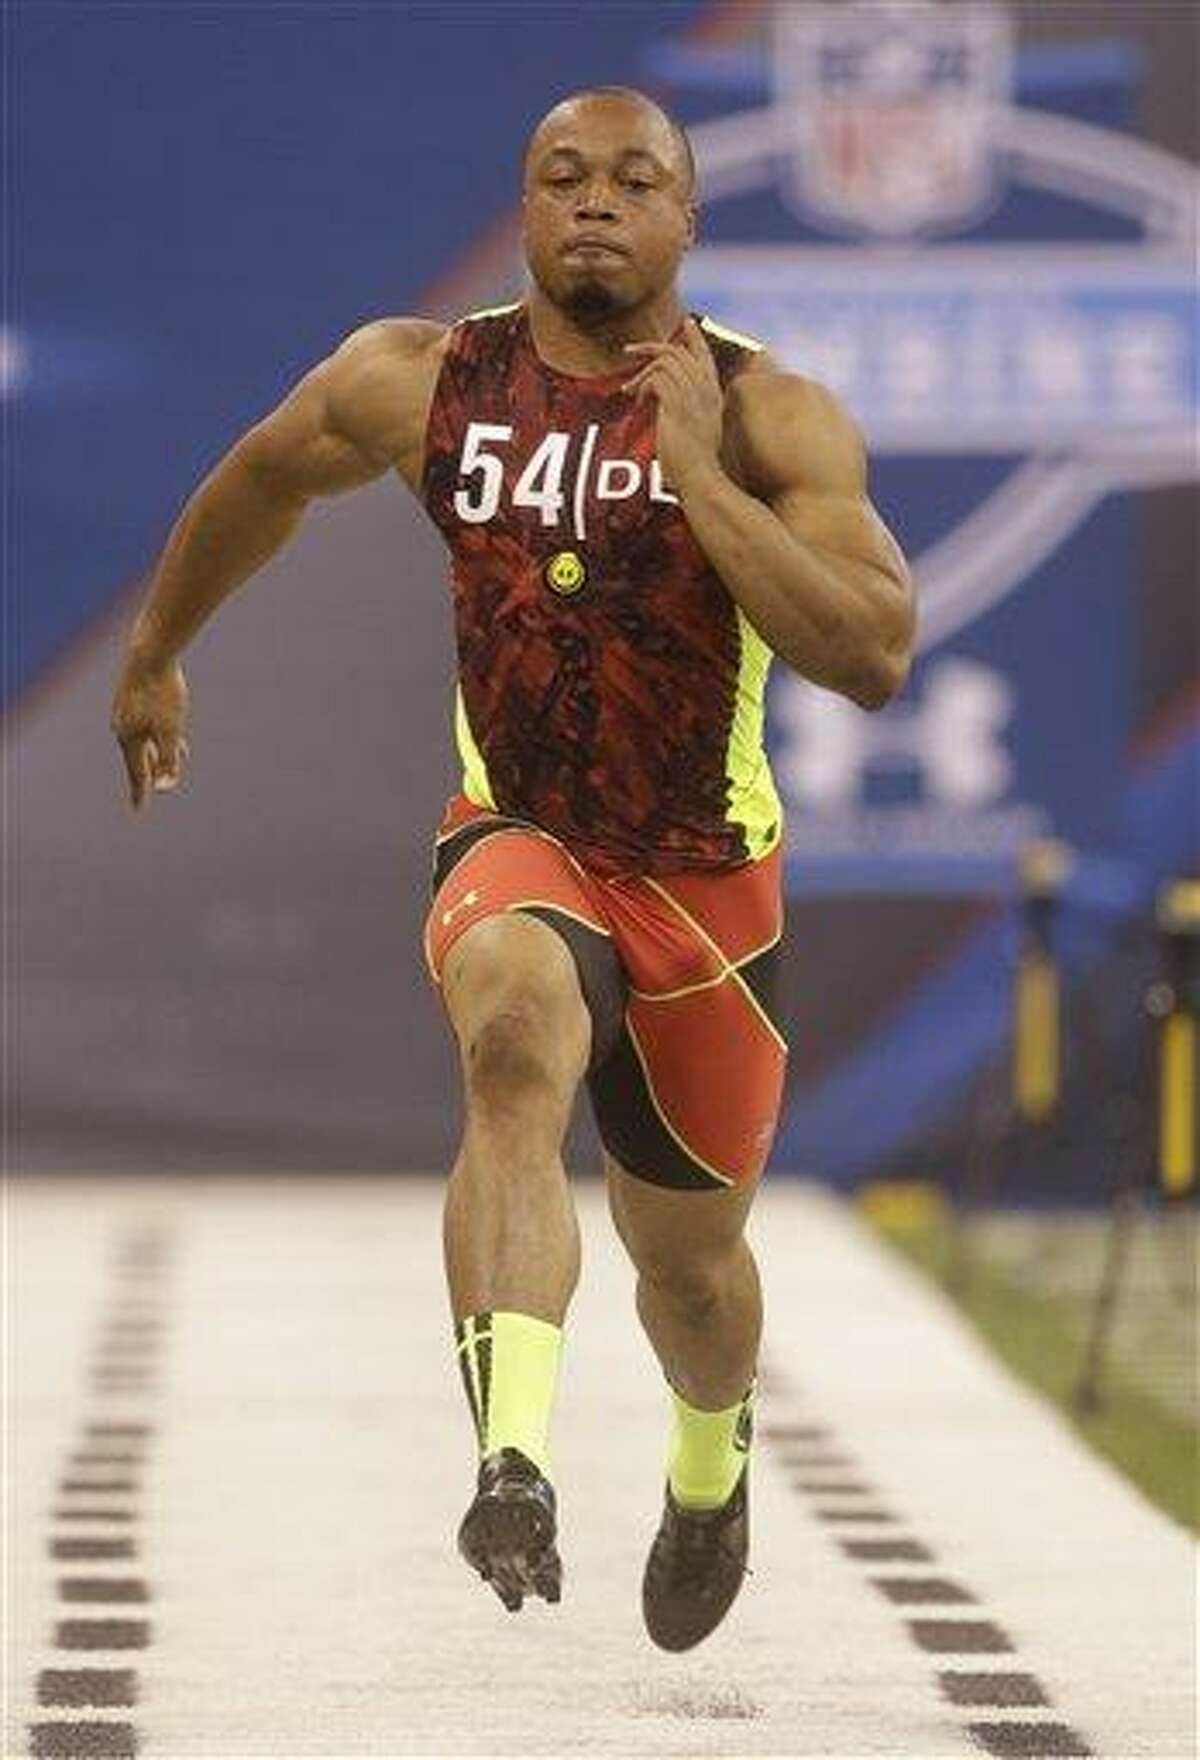 Connecticut defensive lineman Trevardo Williams runs a drill during the NFL football scouting combine in Indianapolis, Monday, Feb. 25, 2013. (AP Photo/Dave Martin)